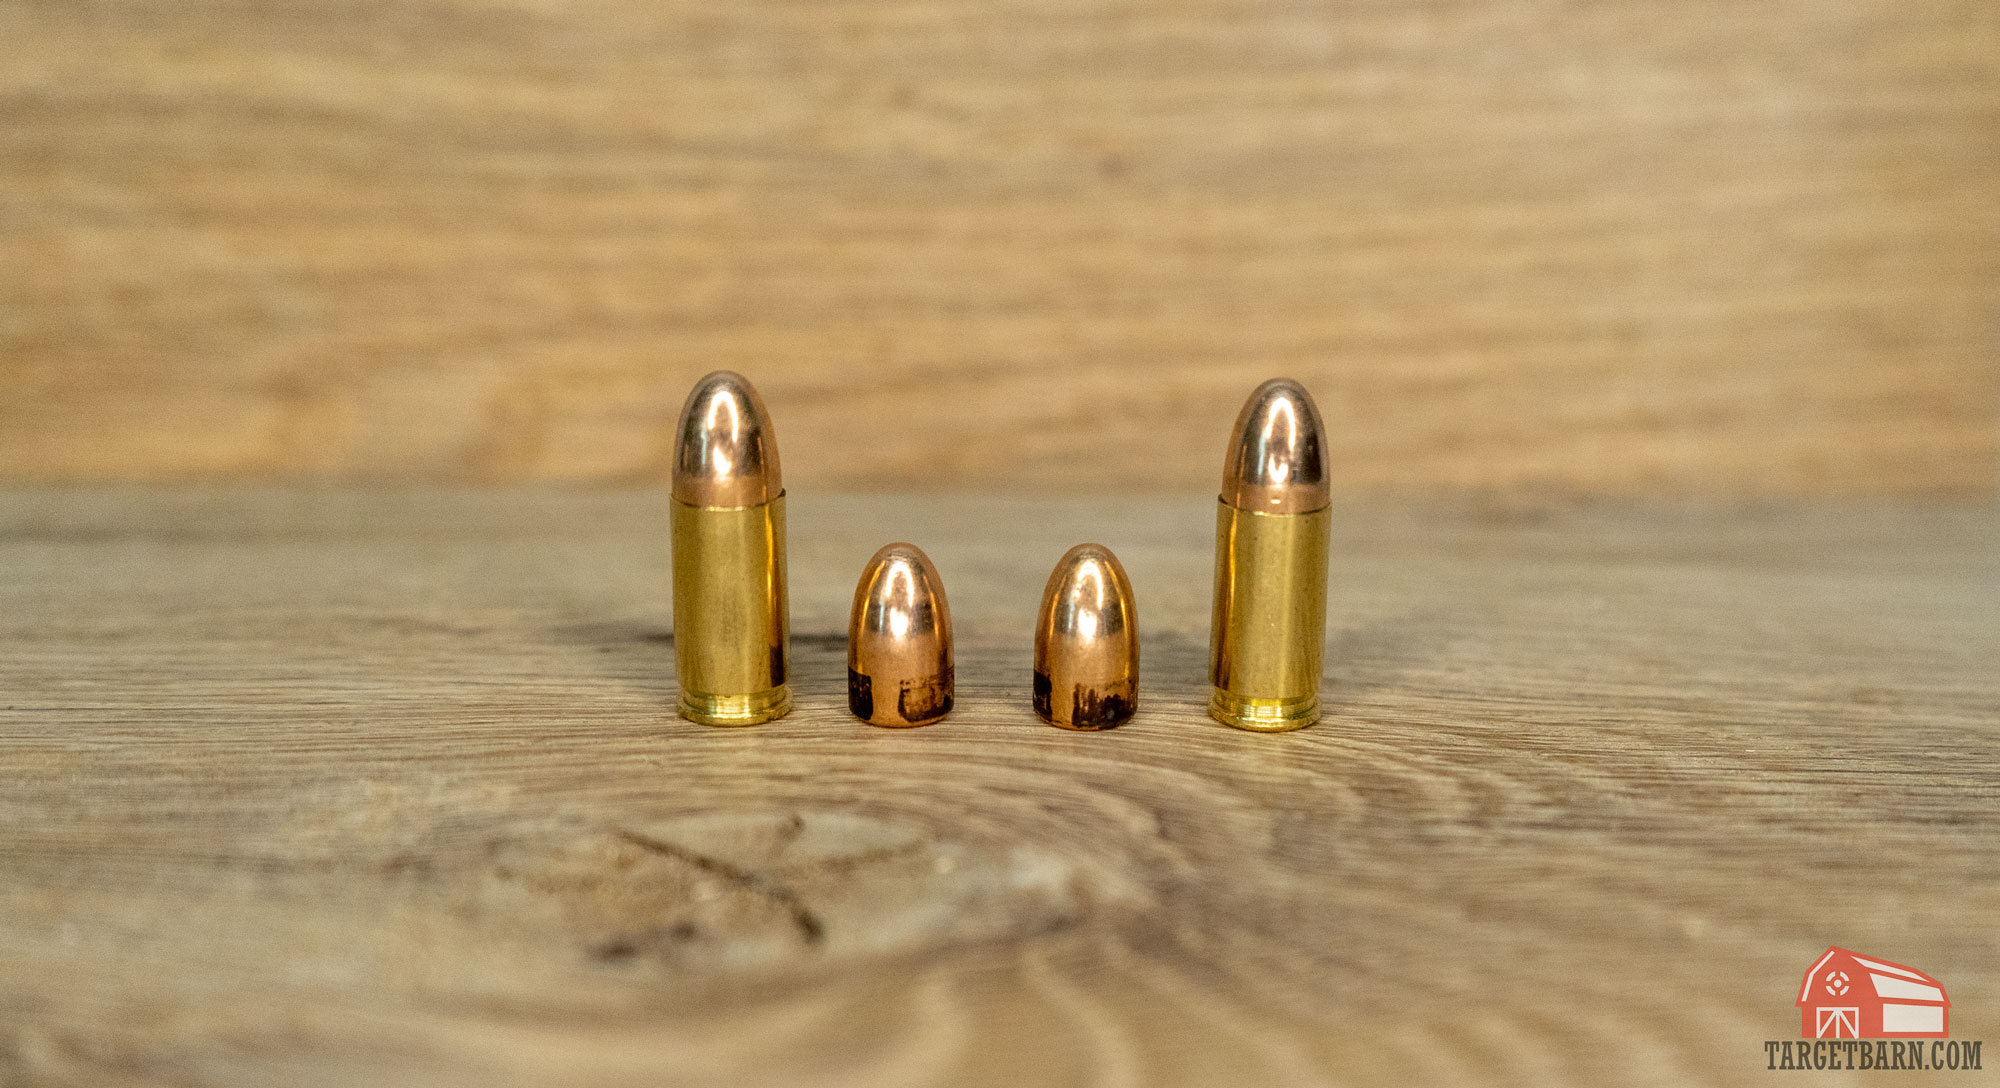 a 9mm 115 grain round and bullet on the left and a 9mm 124 grain bullet and round on the right